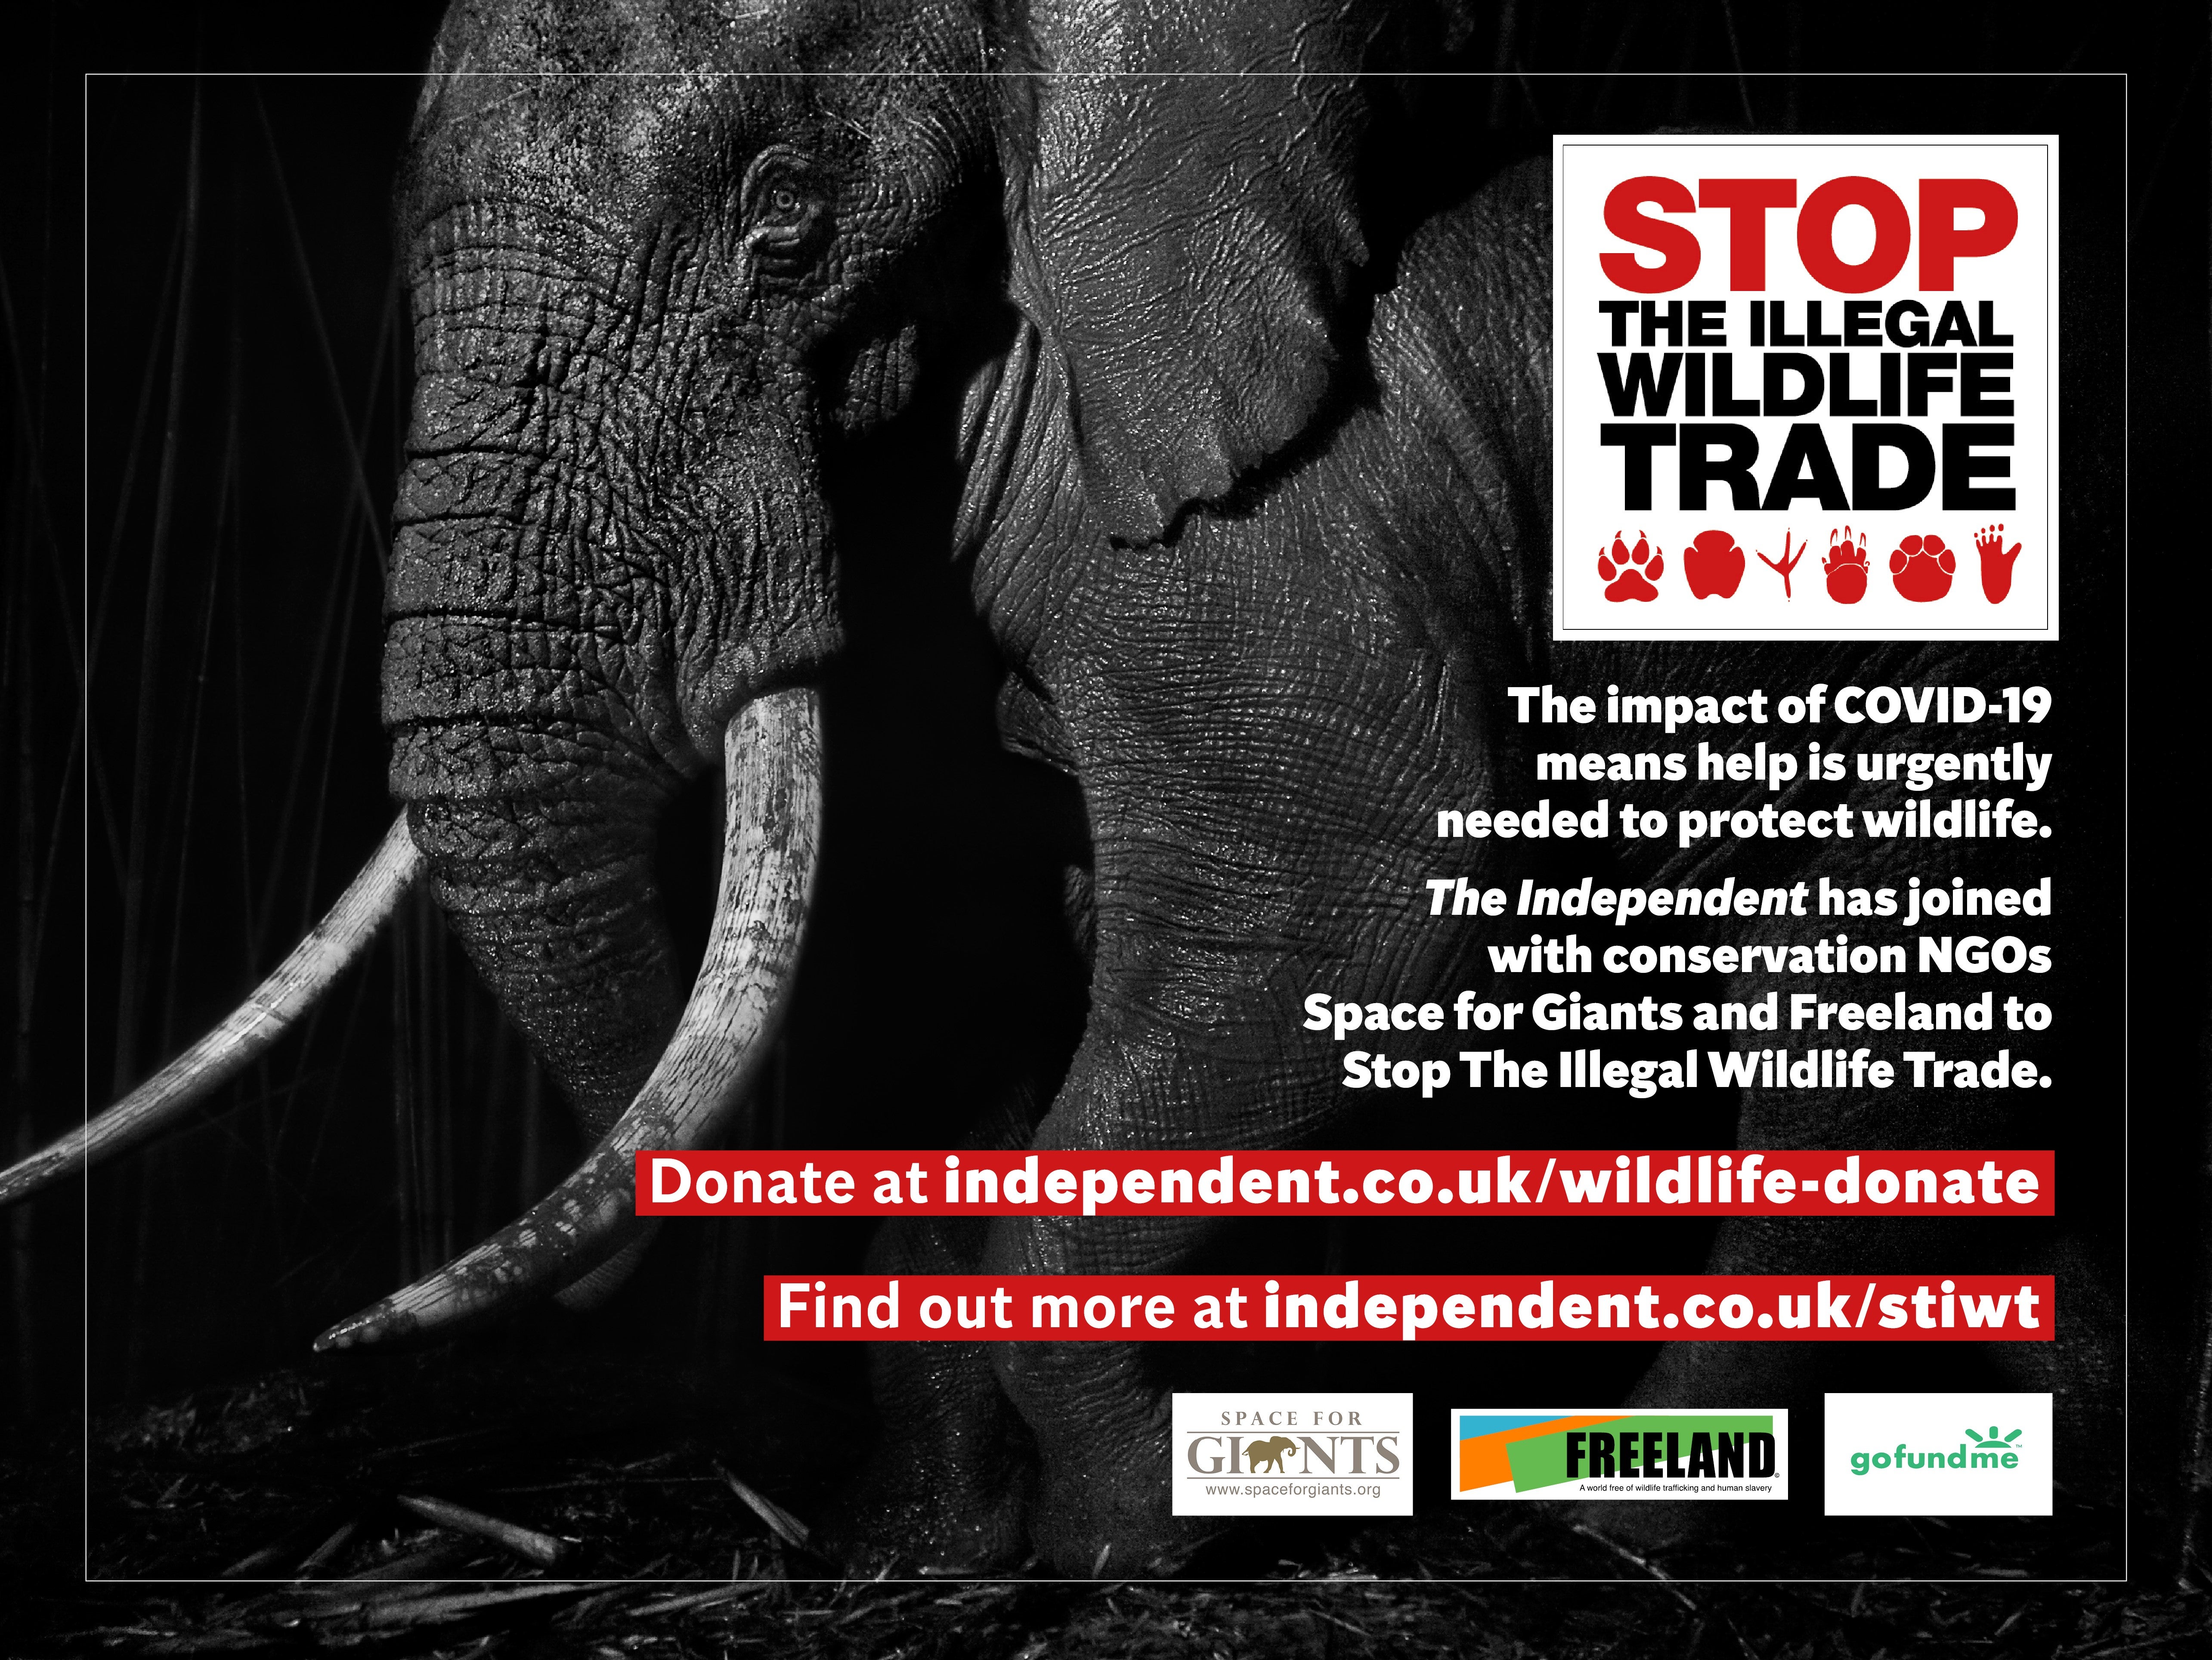 The Independent’s Stop The Illegal Wildlife campaign was set up in response to Covid-19 to protect wildlife and prevent future pandemics, you can donate HERE